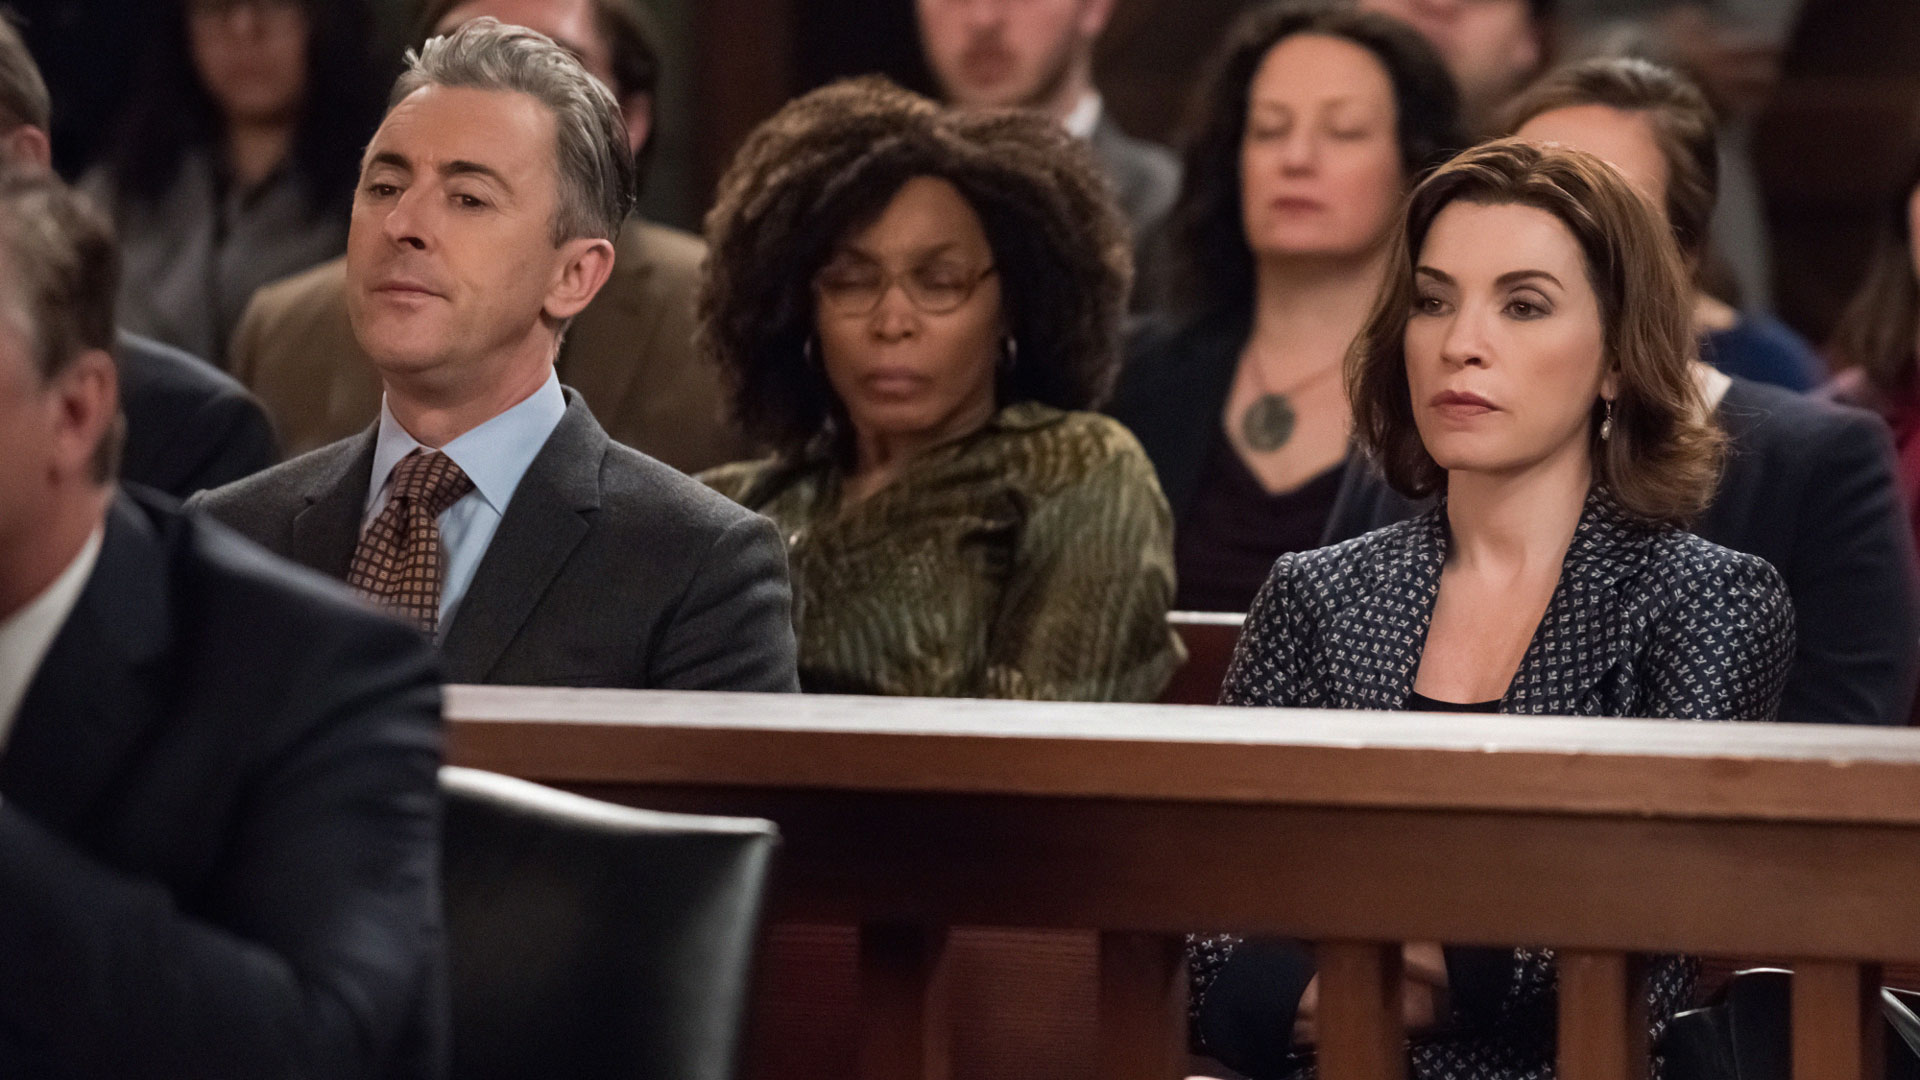 Eli Gold and Alicia Florrick look solemn in the courtroom gallery.